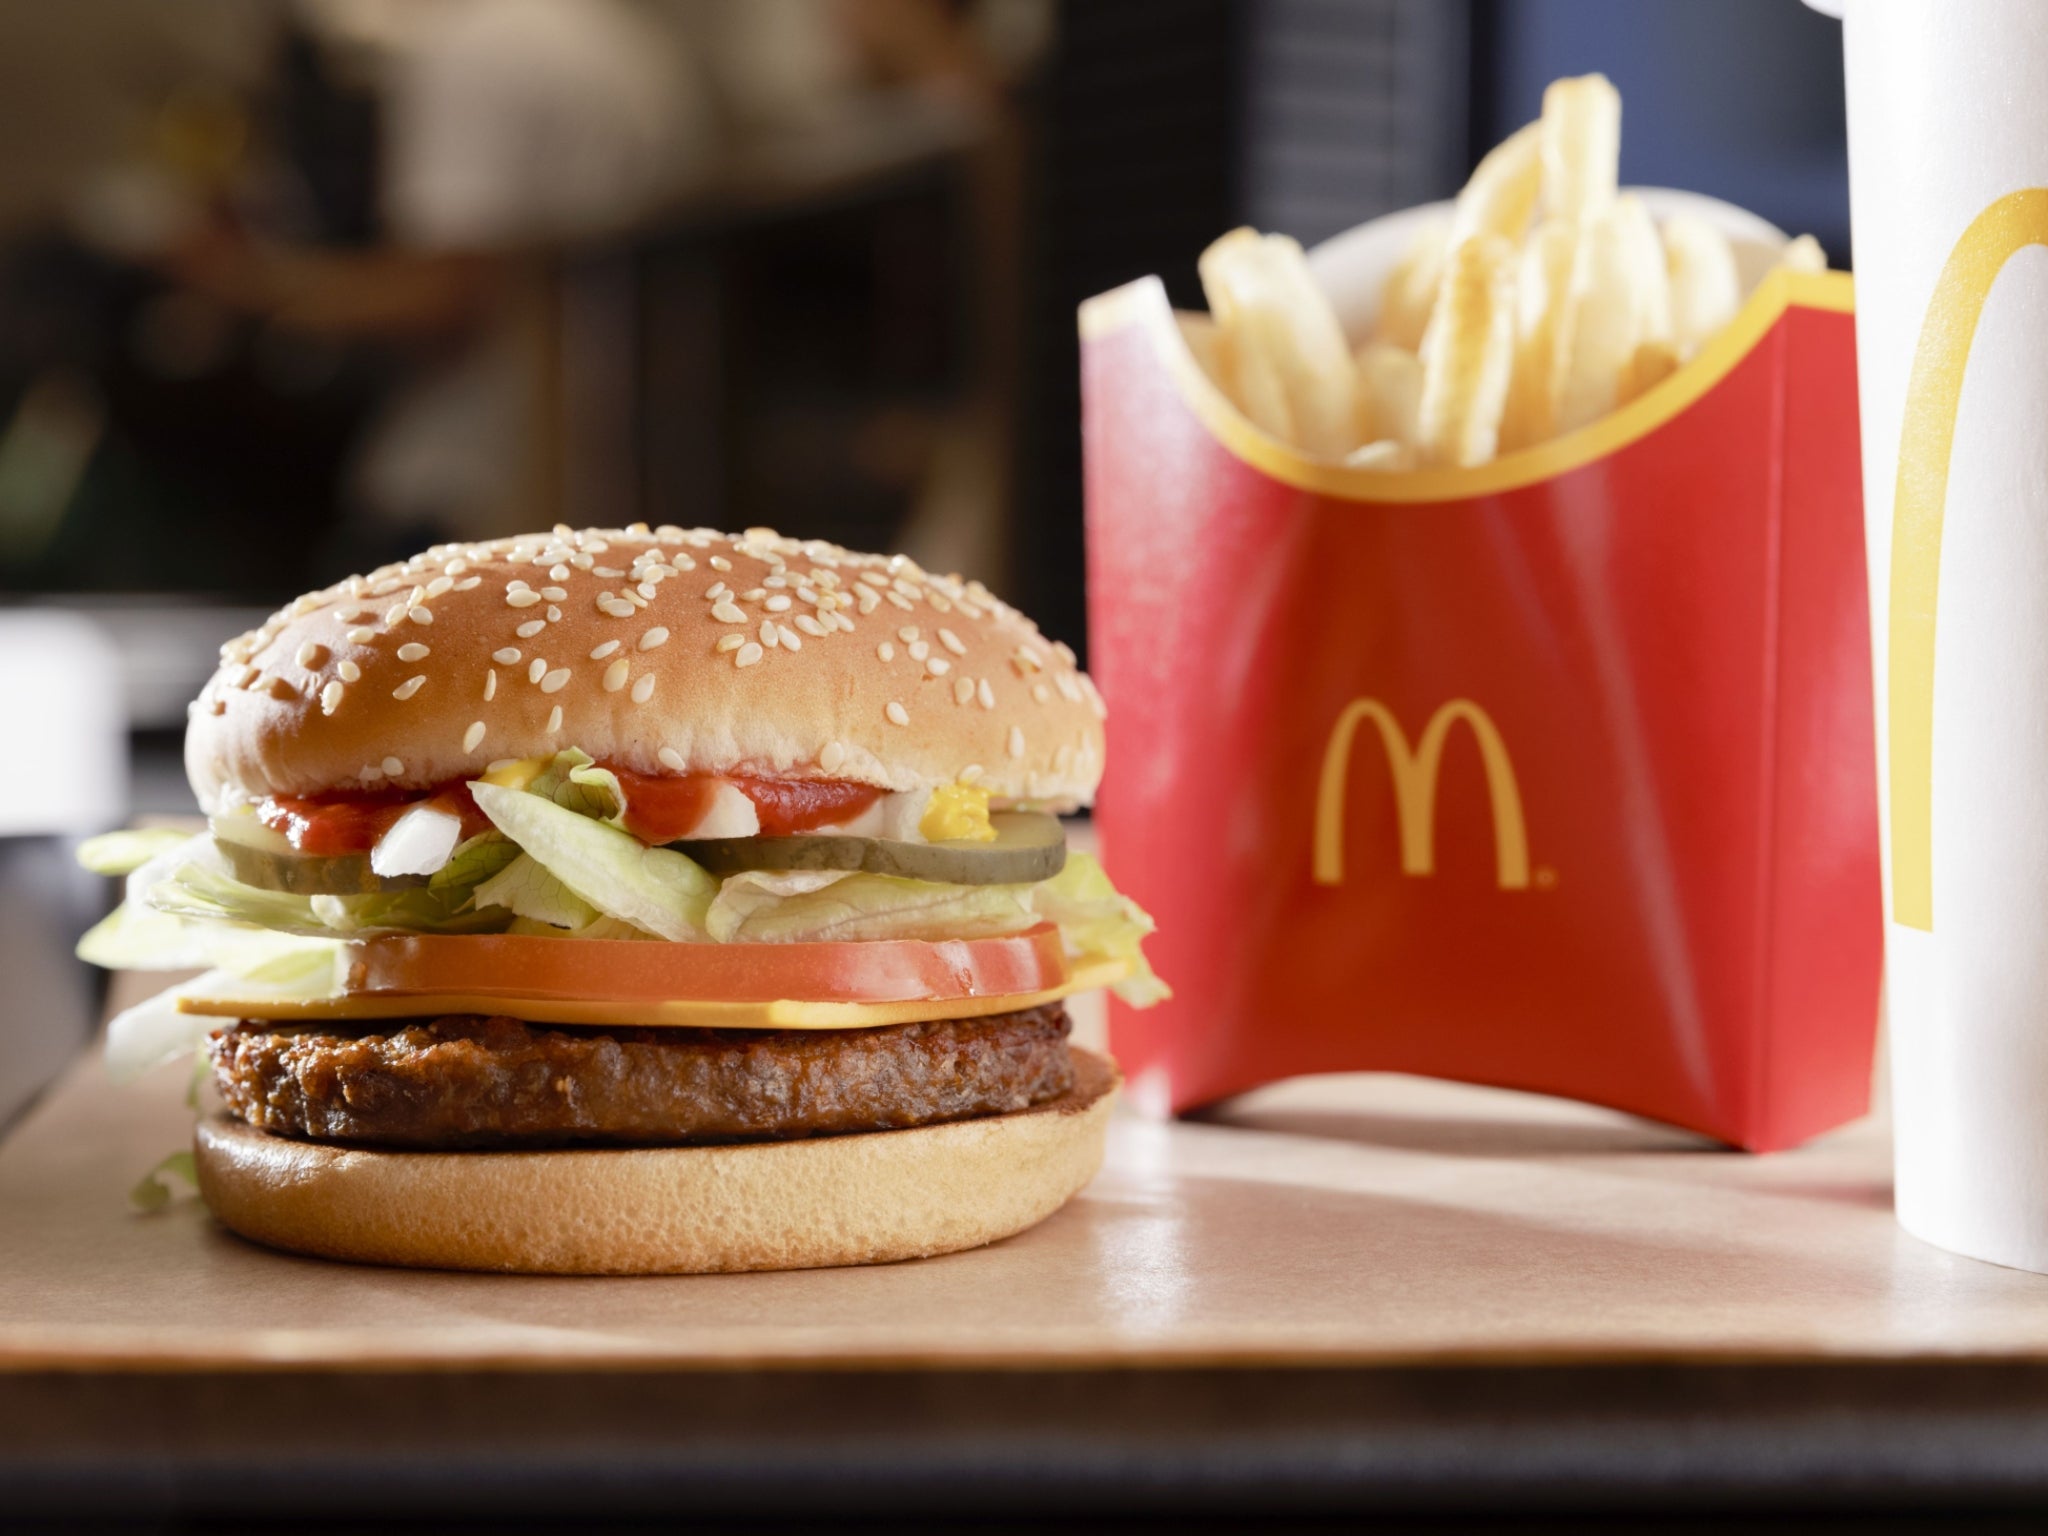 The McPlant burger is now available at 250 McDonald’s restaurants across the UK